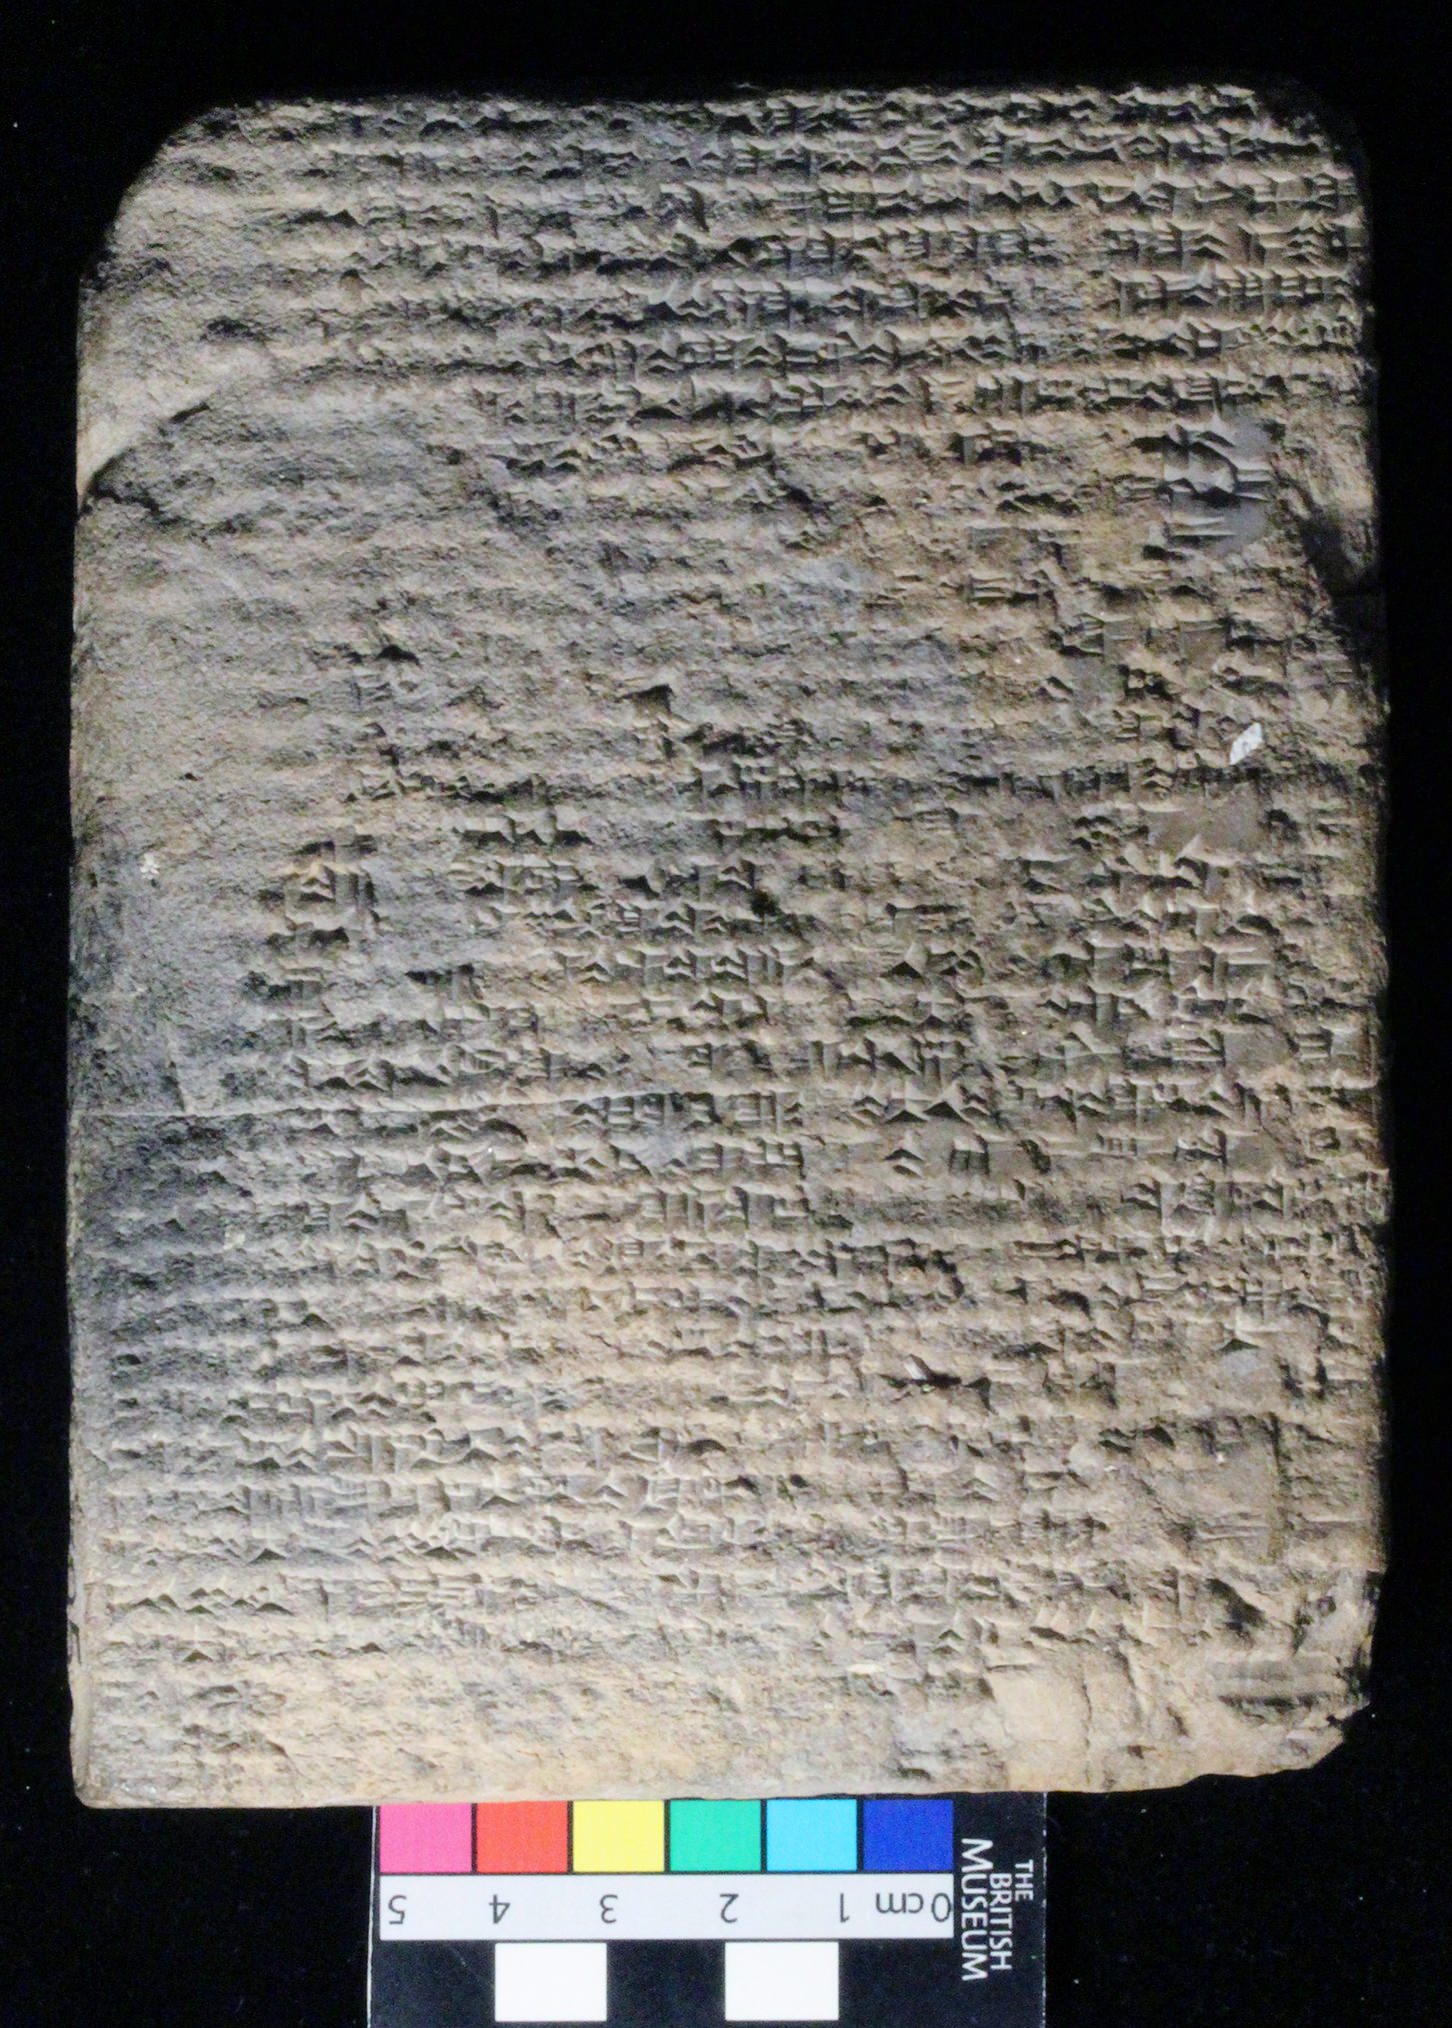 The latest datable Mesopotamian text commentary